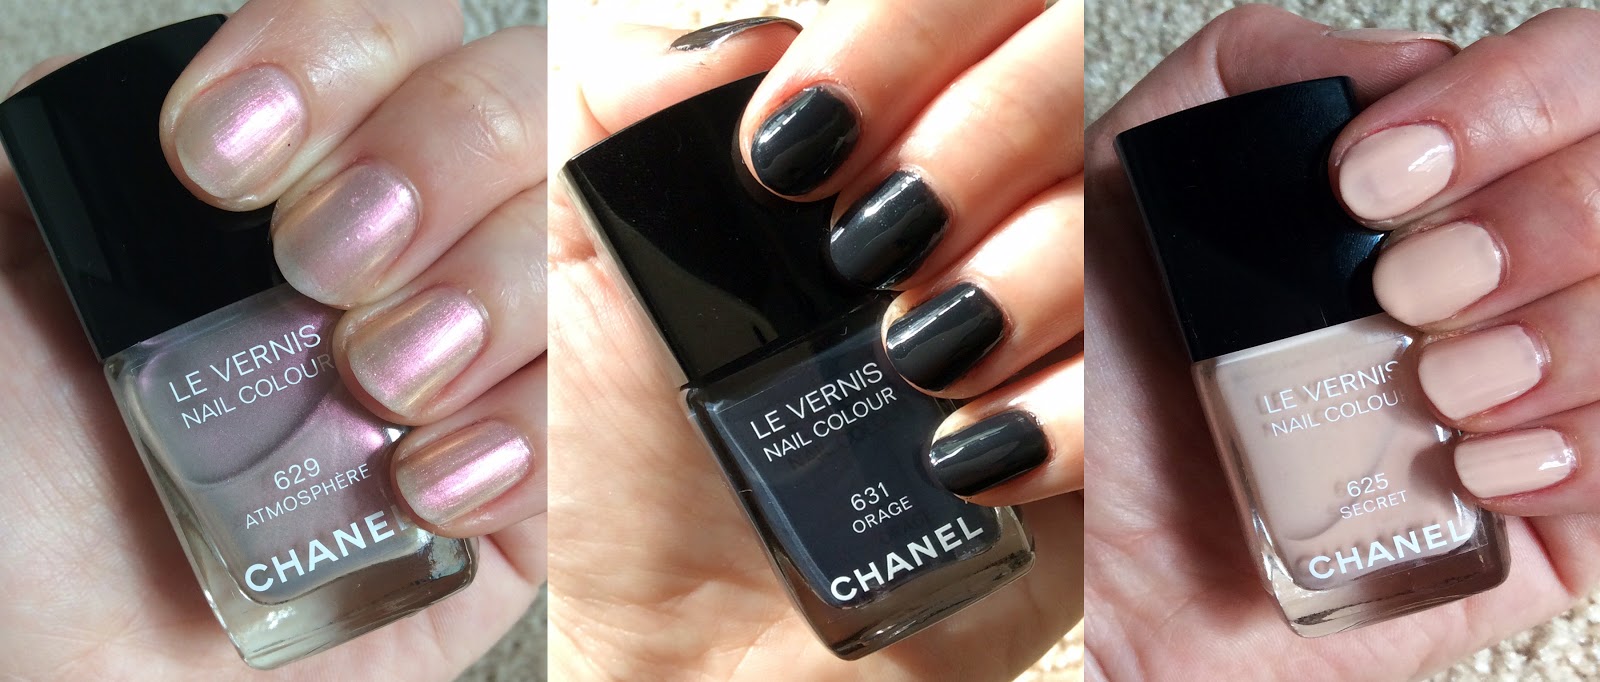 The Beauty of Life: Introducing the Chanel Etats Poetiques Fall 2014  Collection: Nail Polish Swatches